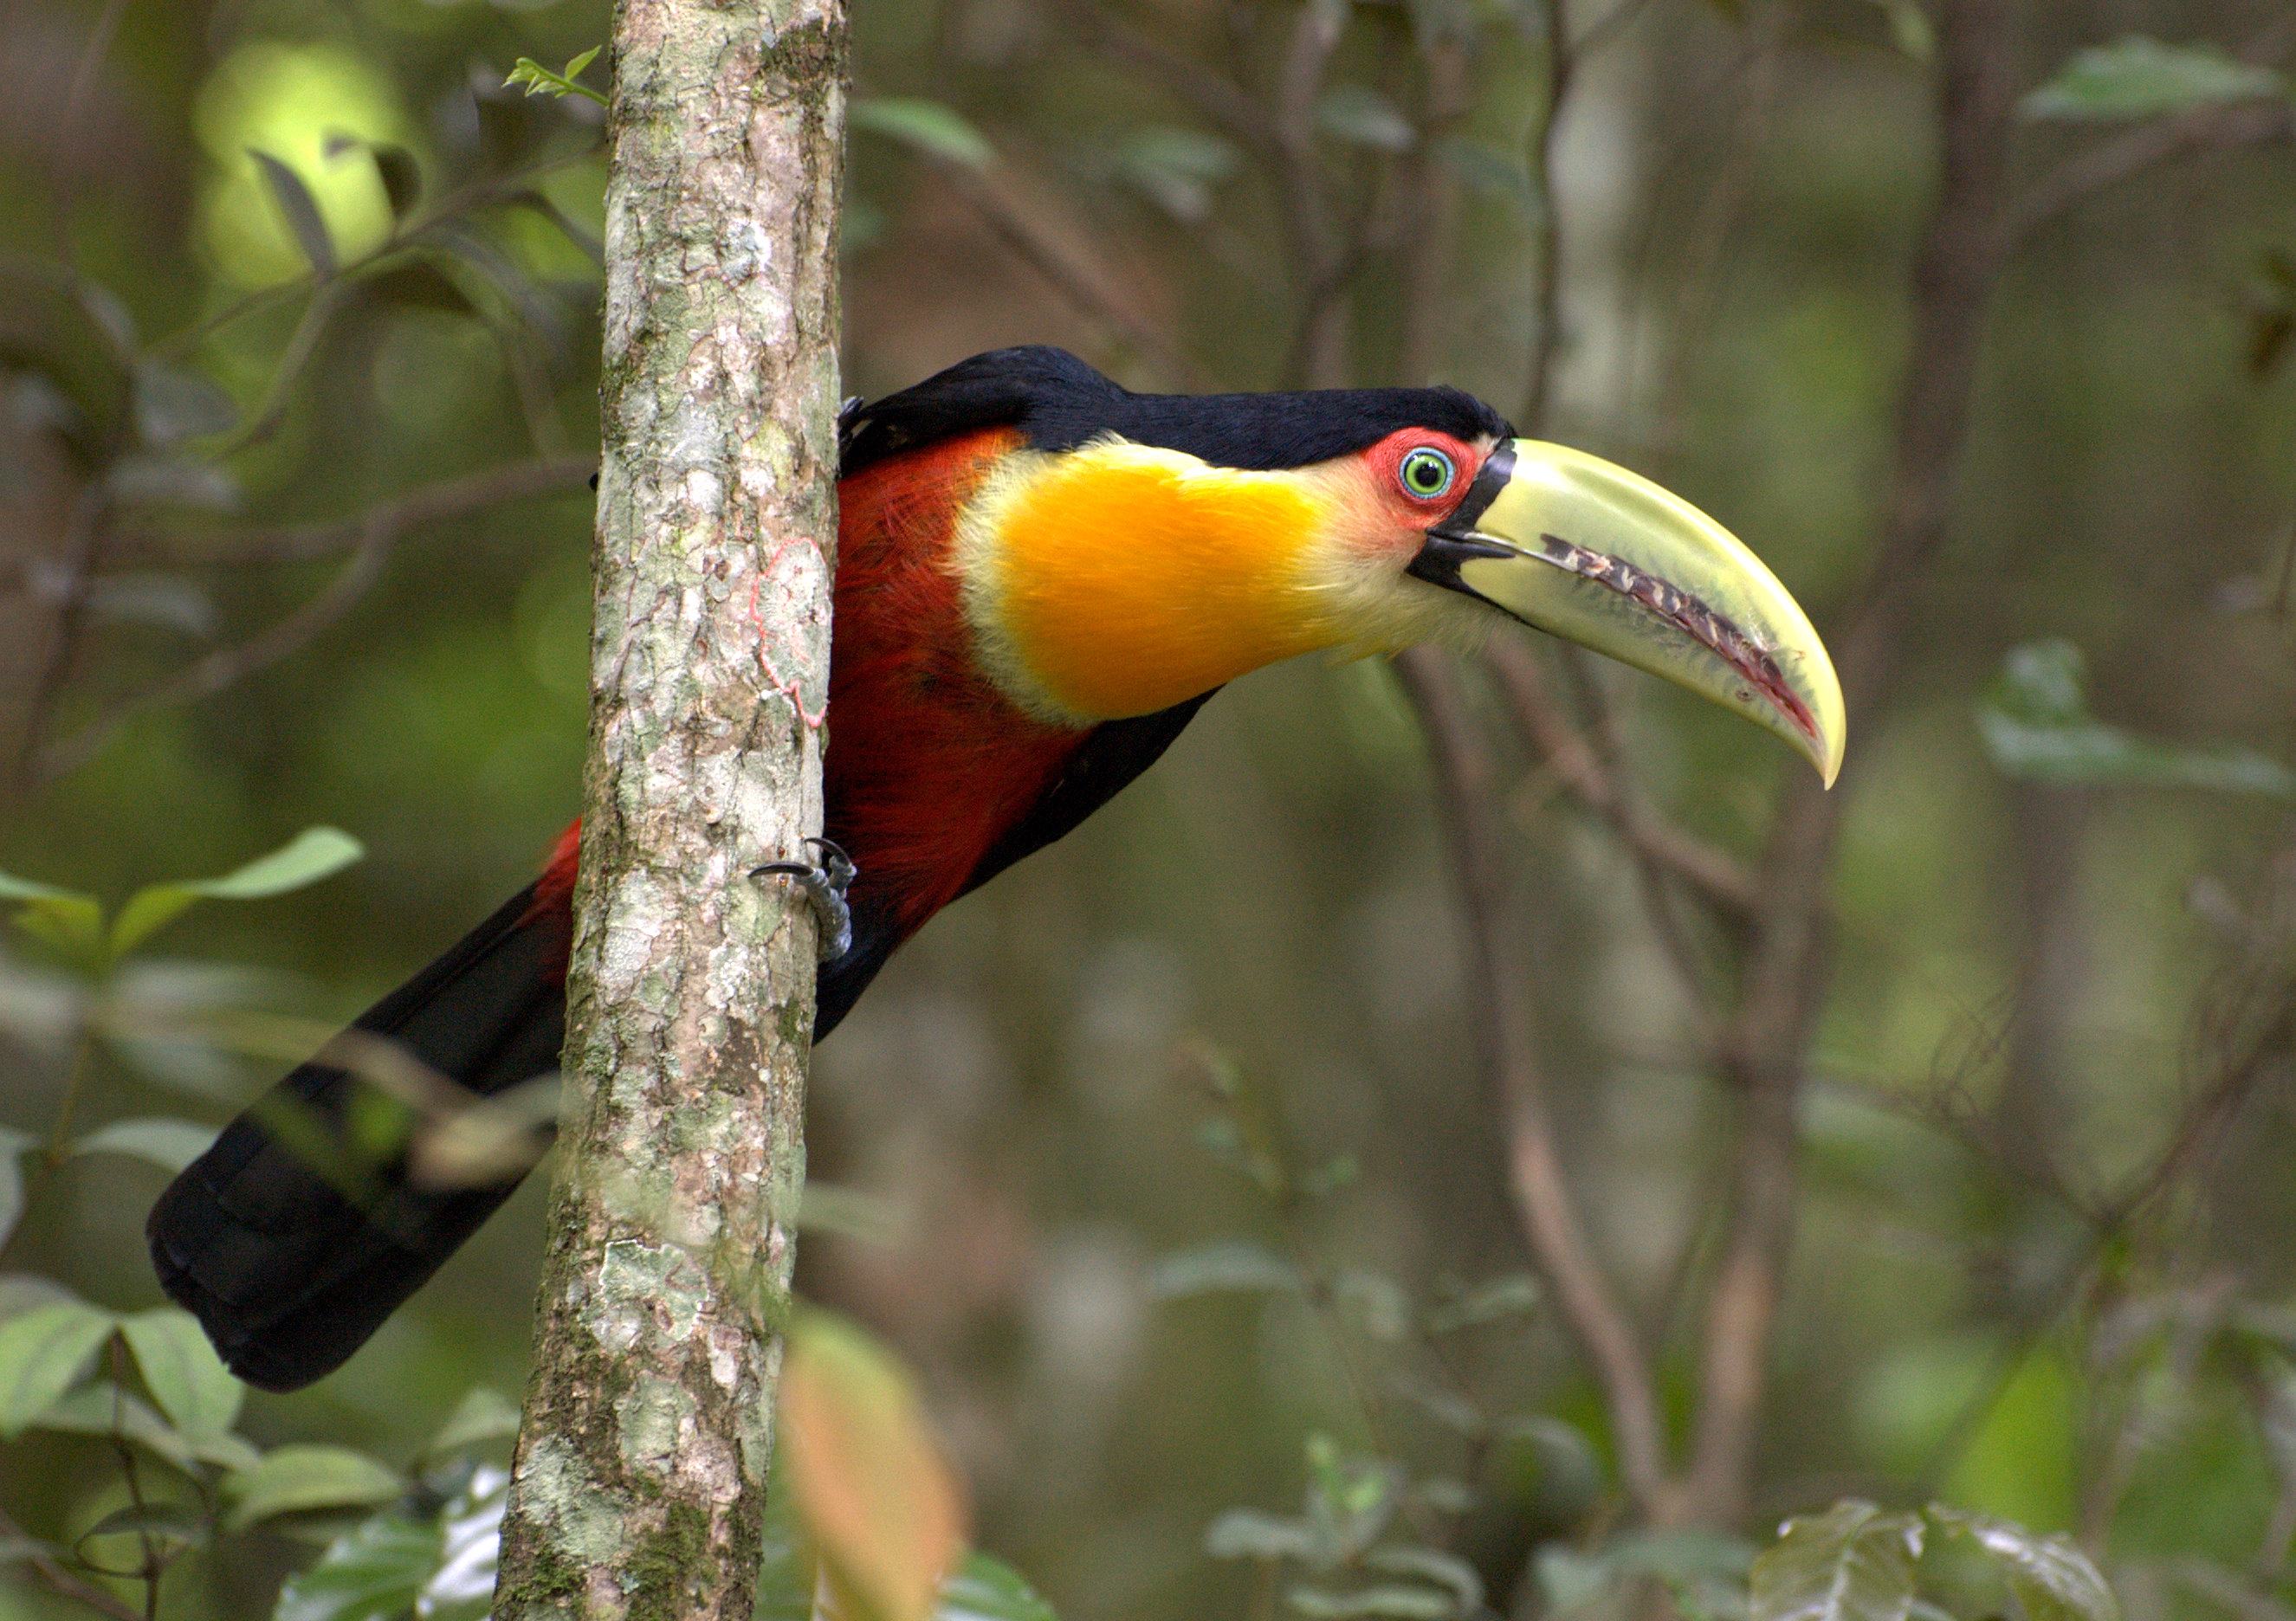 Red-breasted toucan